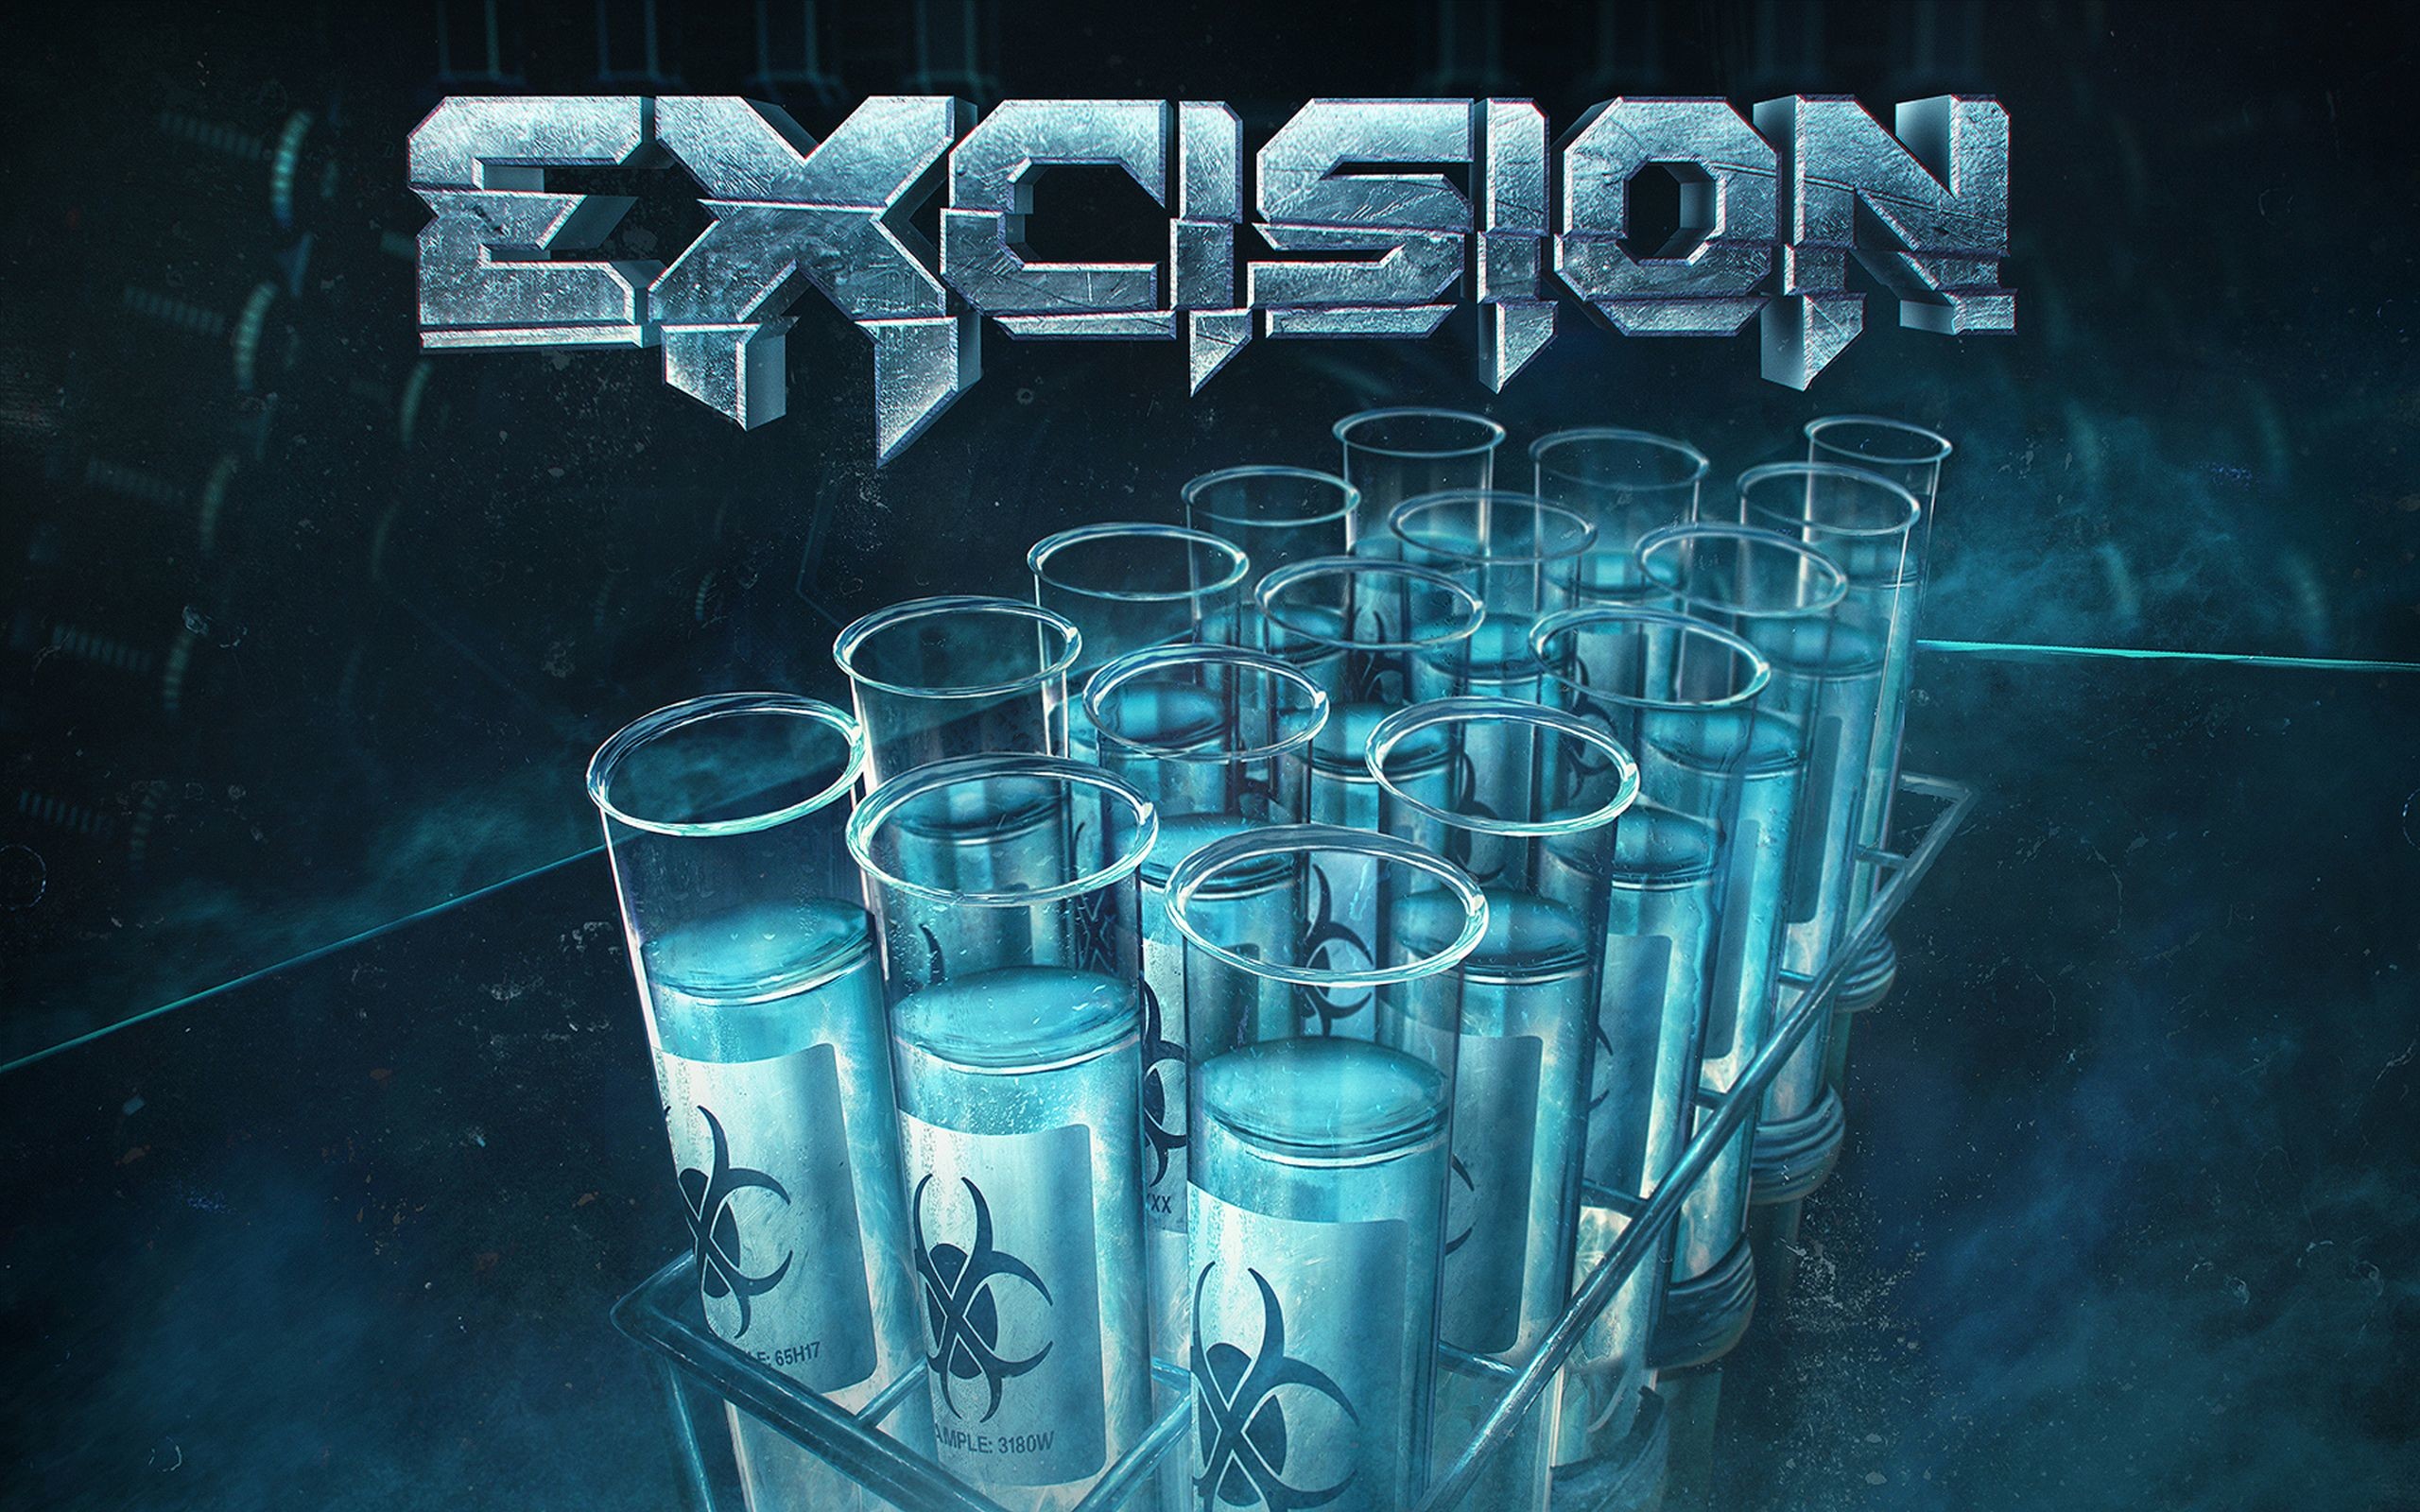 2560x1600, Excision Virus Wallpapers, Virus Wallpapers - Excision & Space Laces Throwin Elbows - HD Wallpaper 